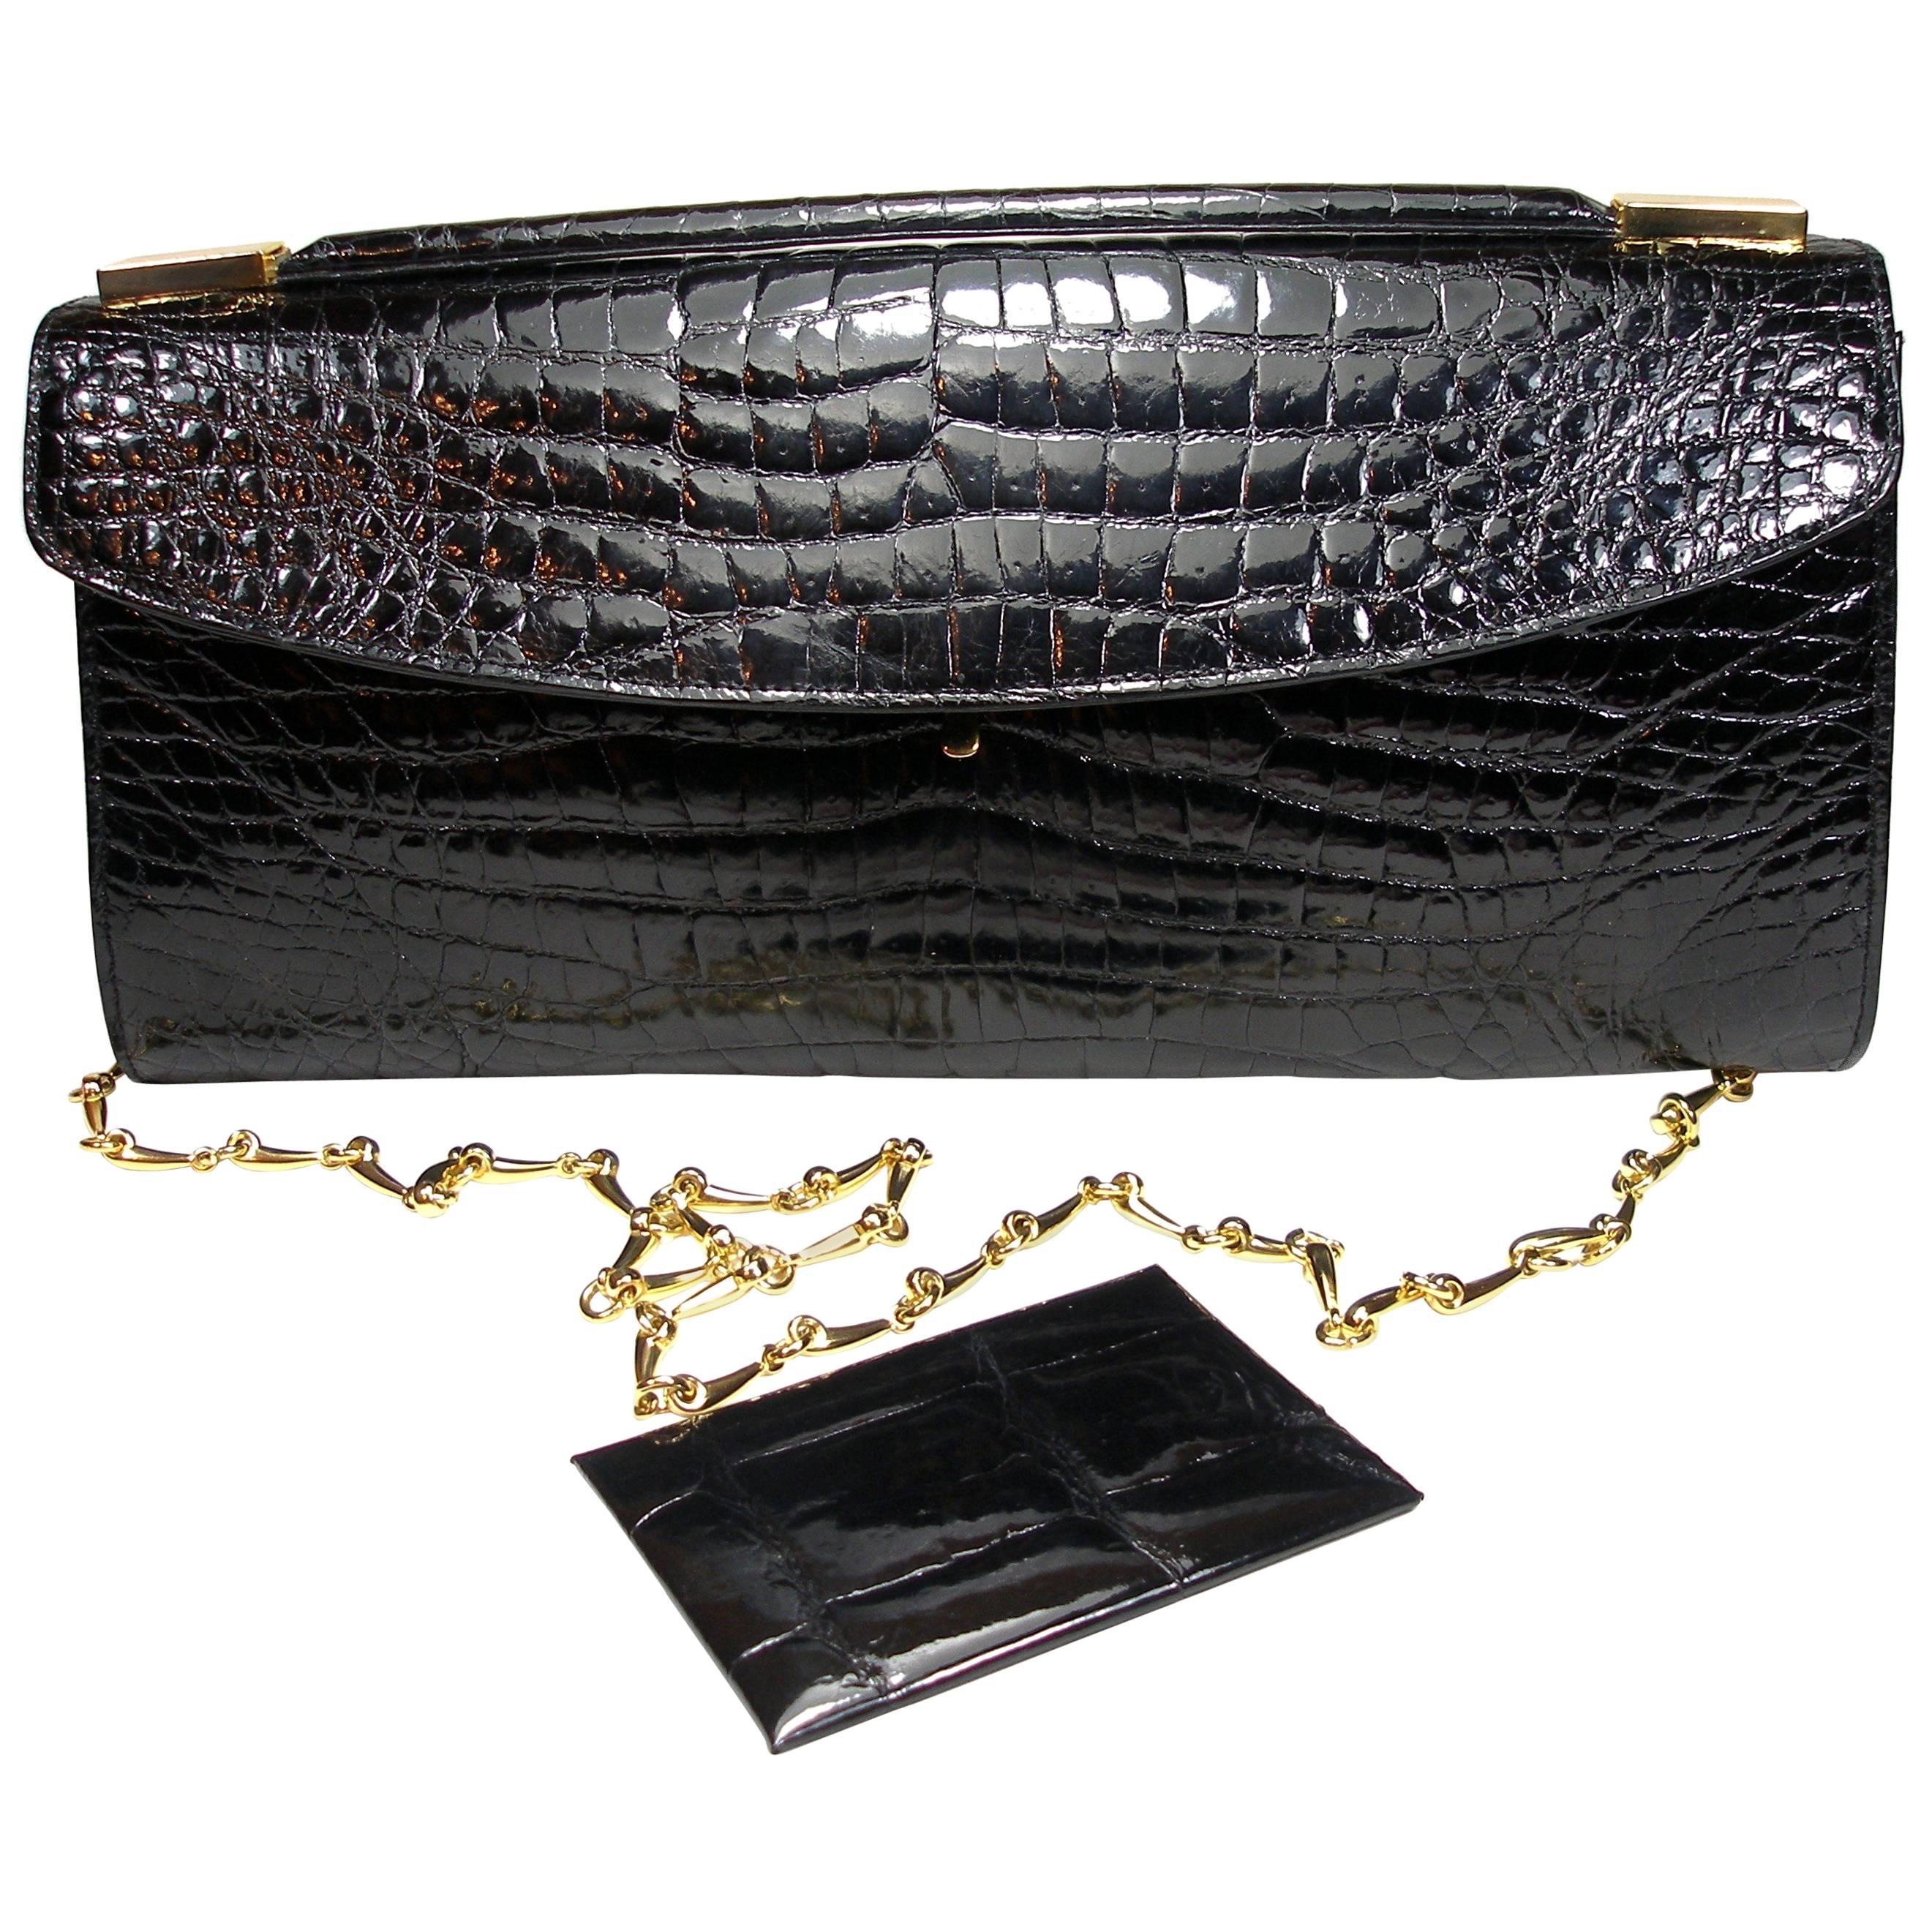 Rare and Vintage Delvaux Black Crocodile Clutch or Evening Bag / Good Condition